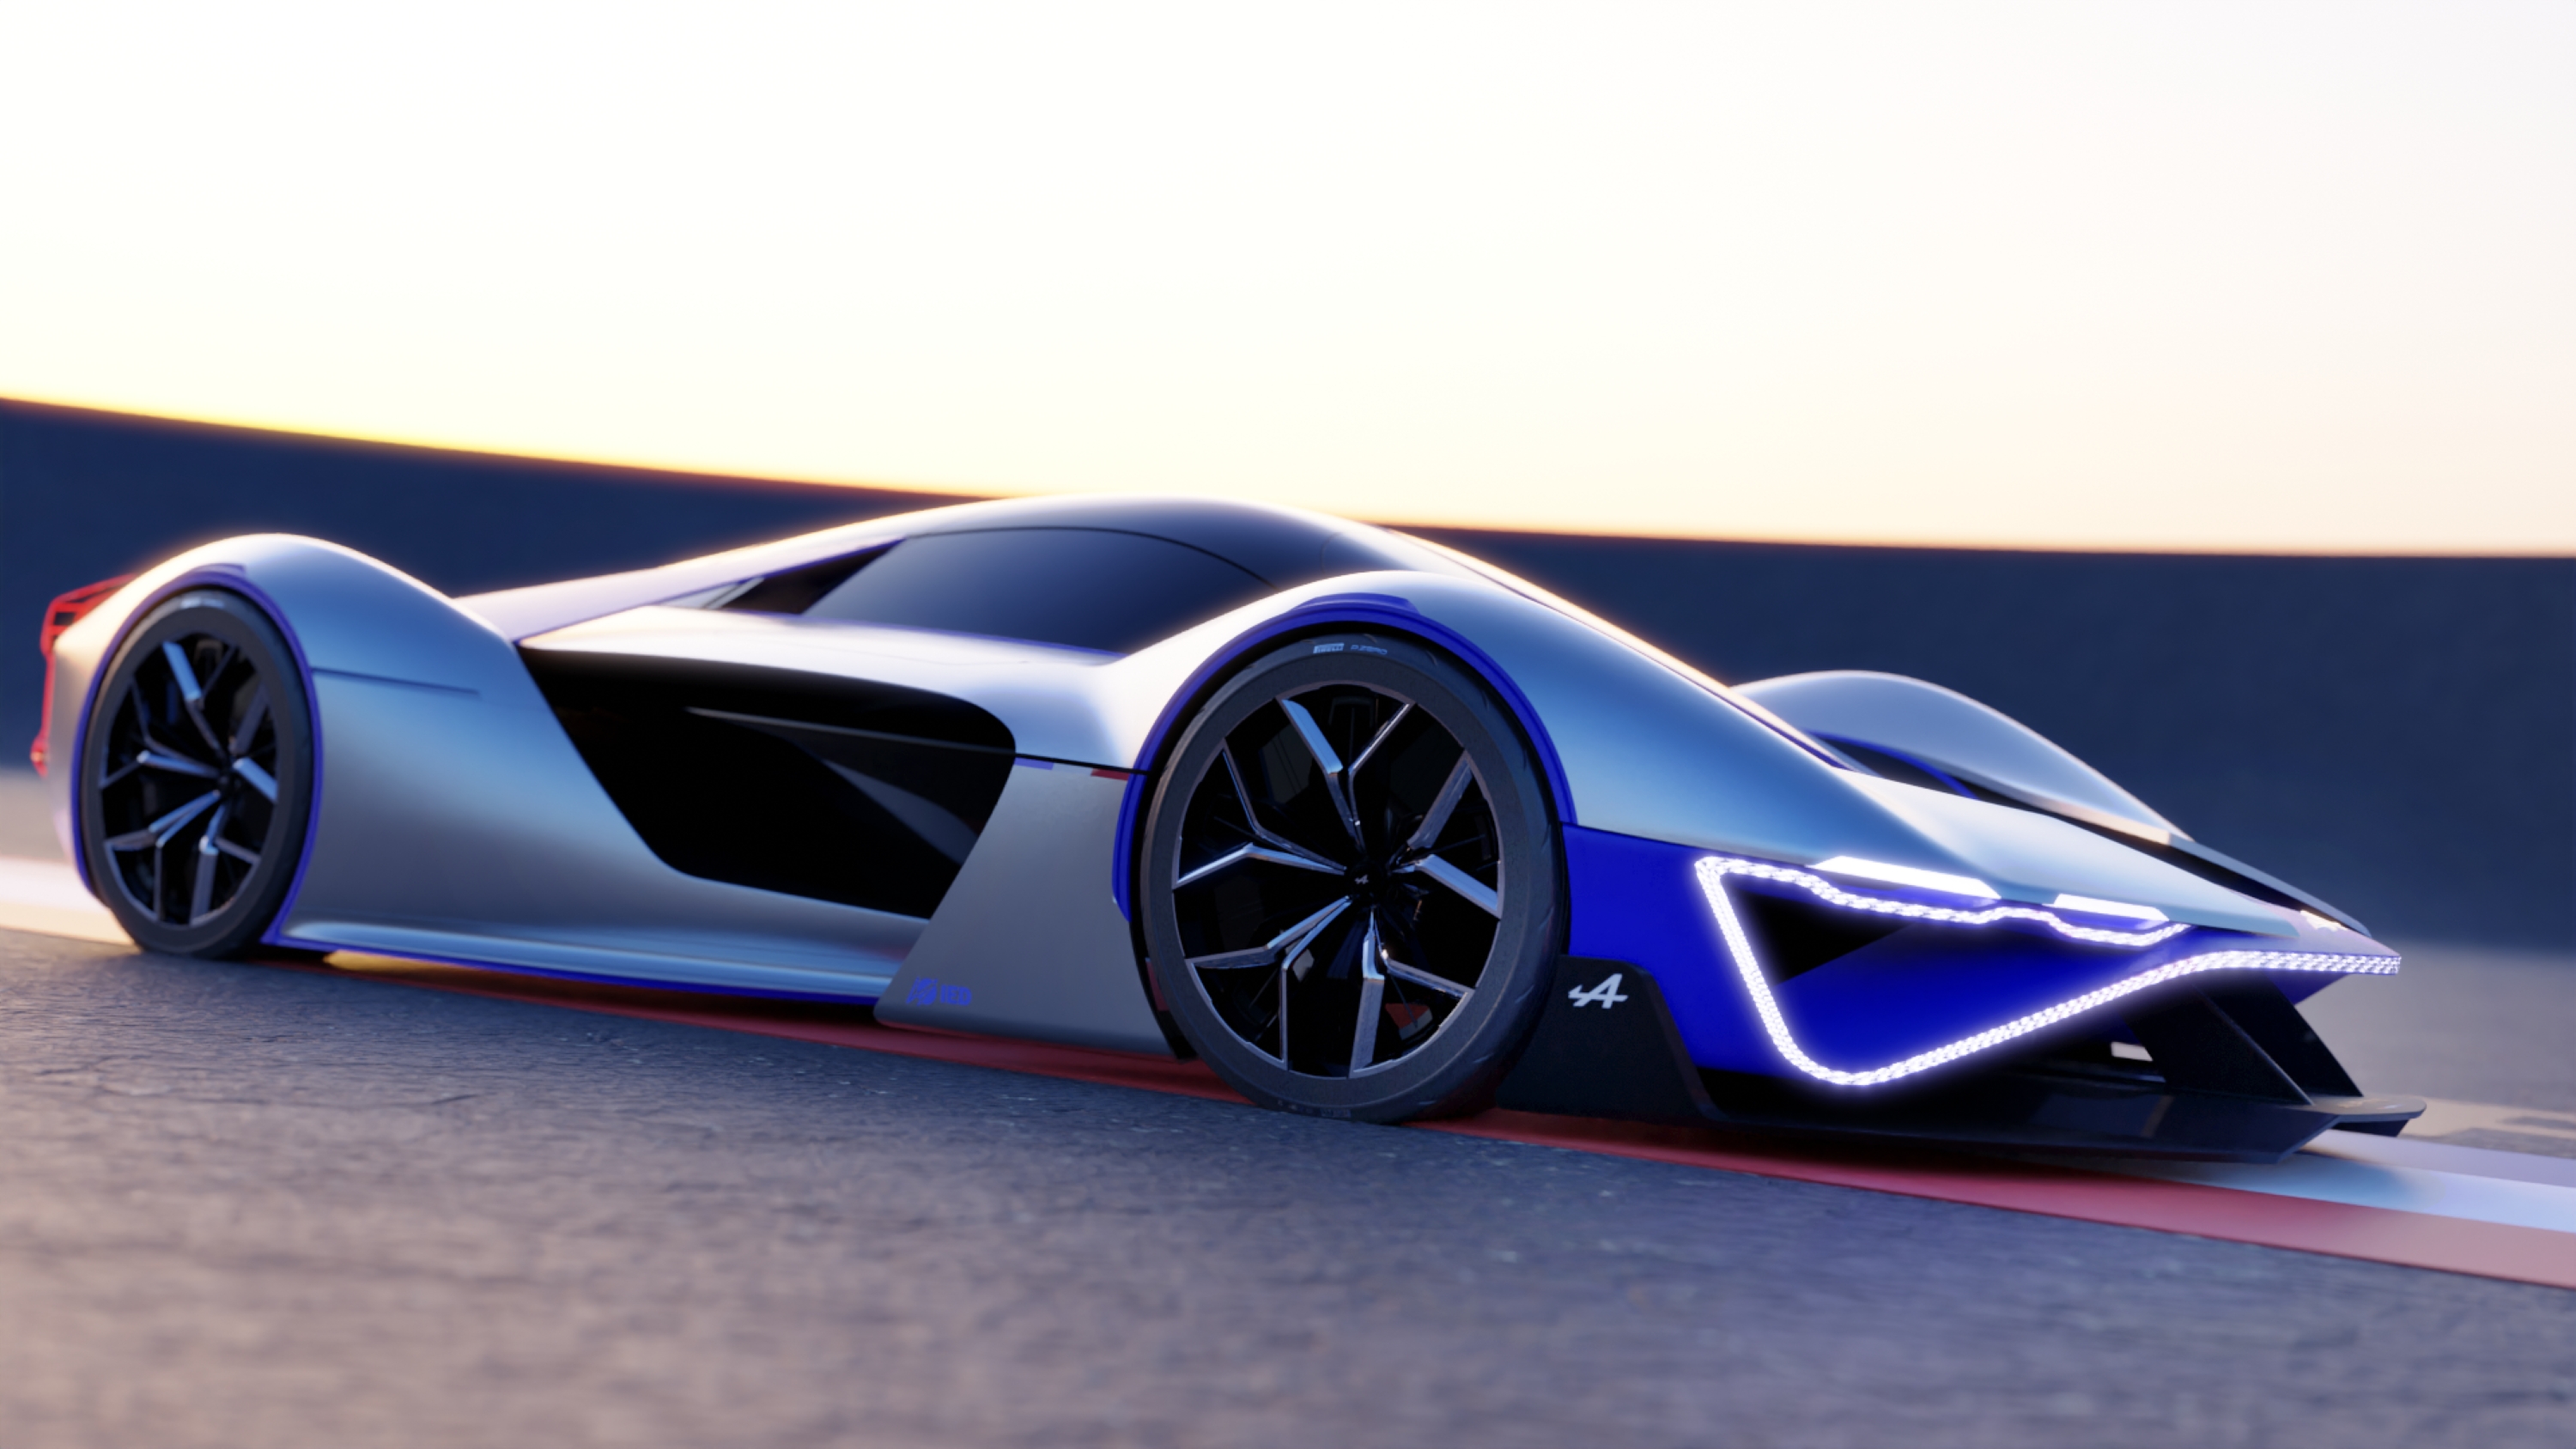 Alpine A4810 by IED Concept